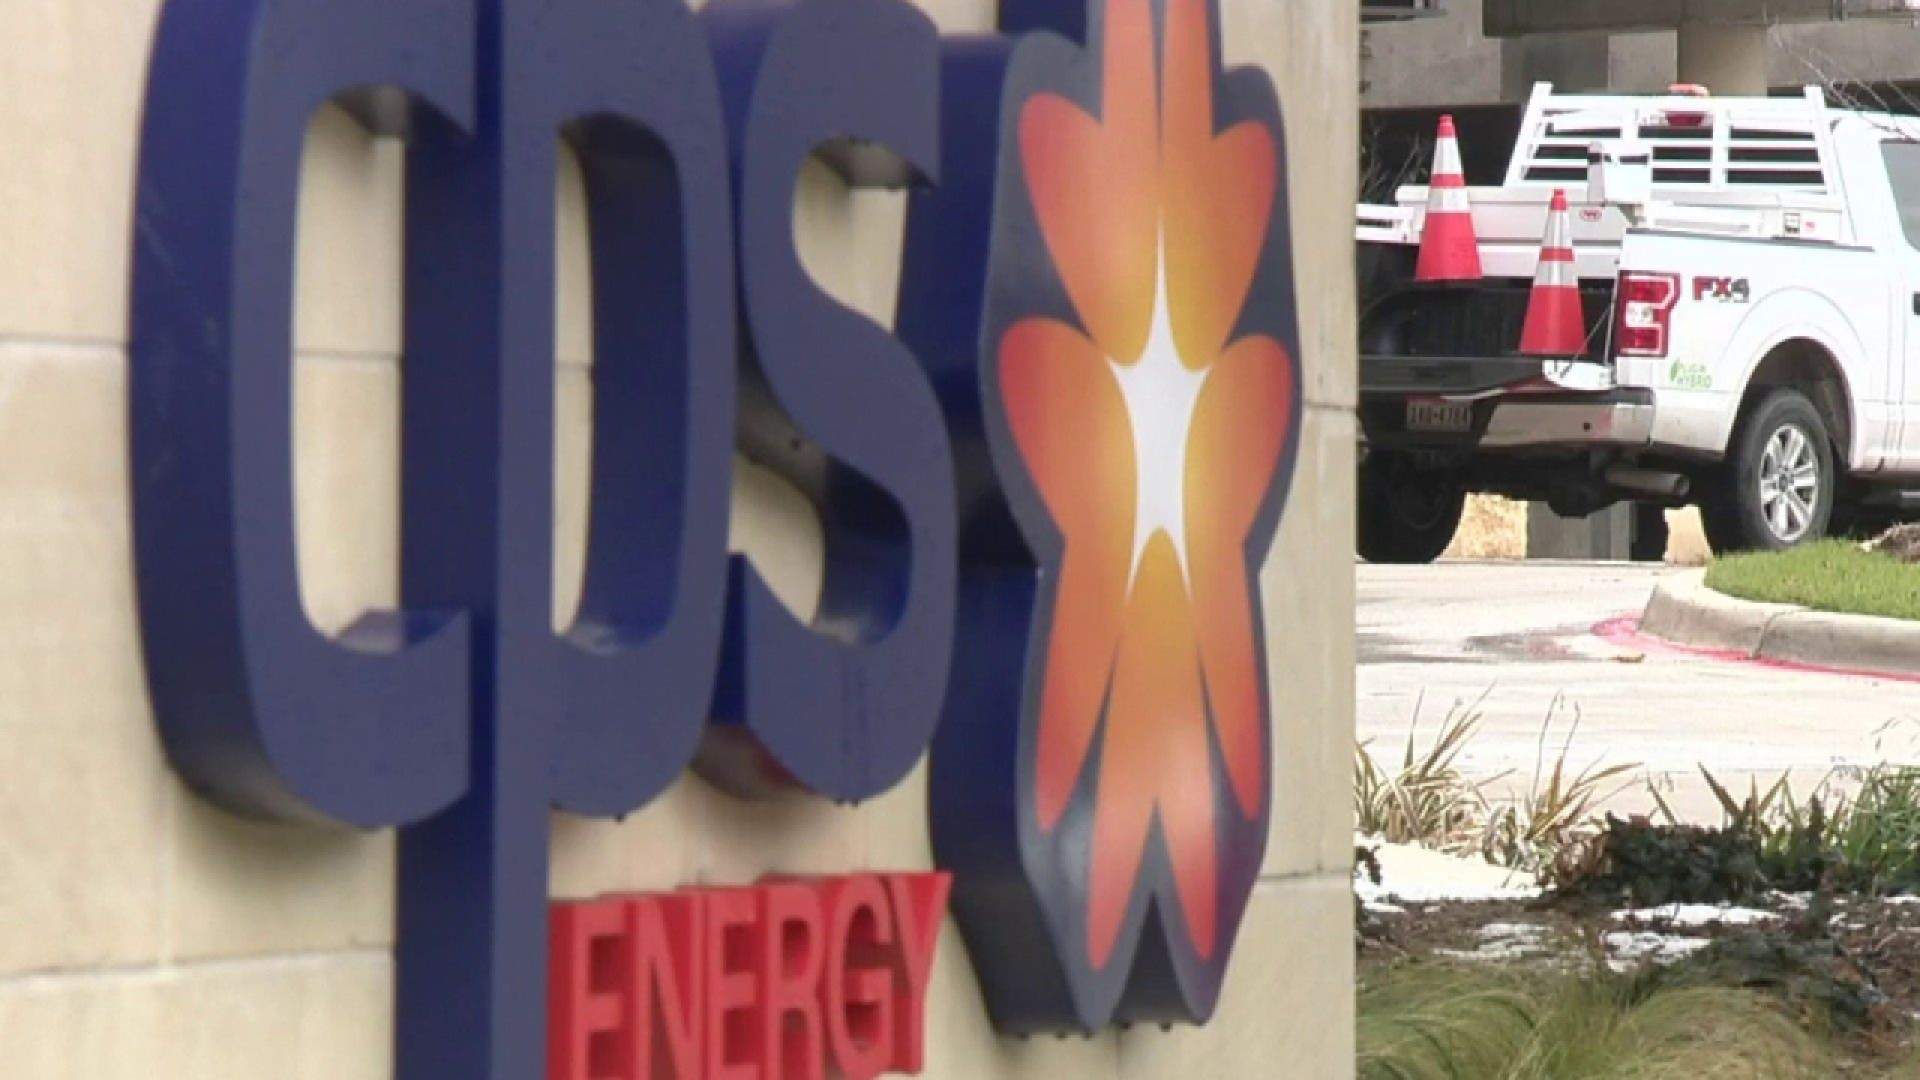 CPS Energy accuses natural gas suppliers of price gouging during winter storm, files lawsuits